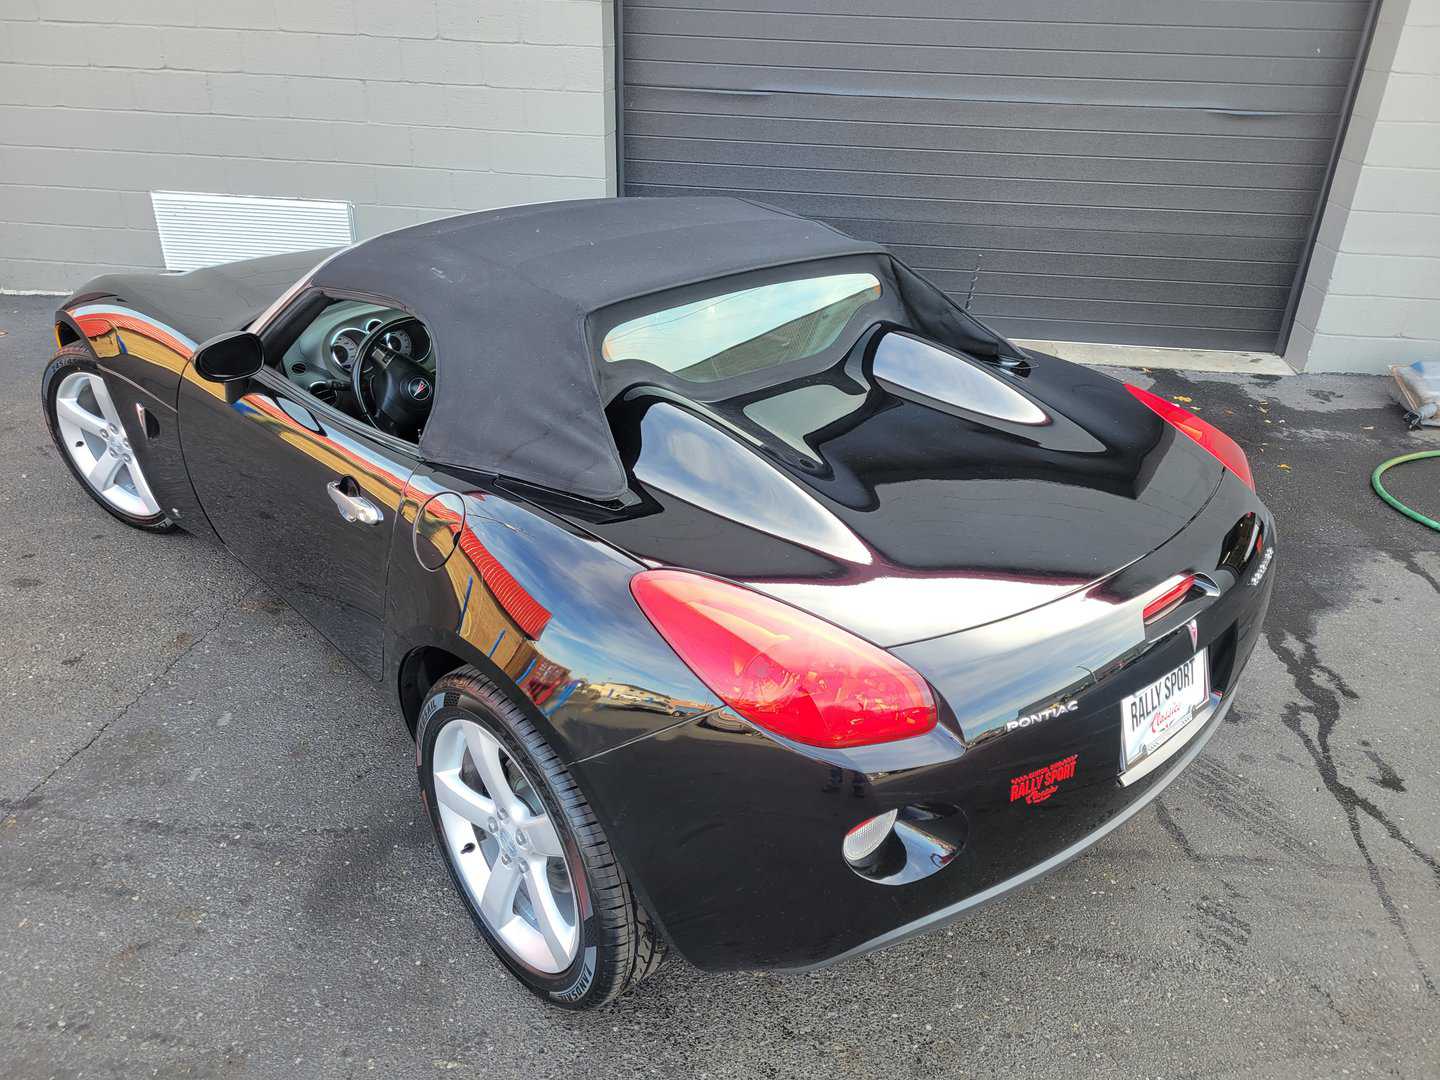 A 2006 Pontiac Solstice, A Sleek Black Sports Car, Parked In Front Of A Garage.